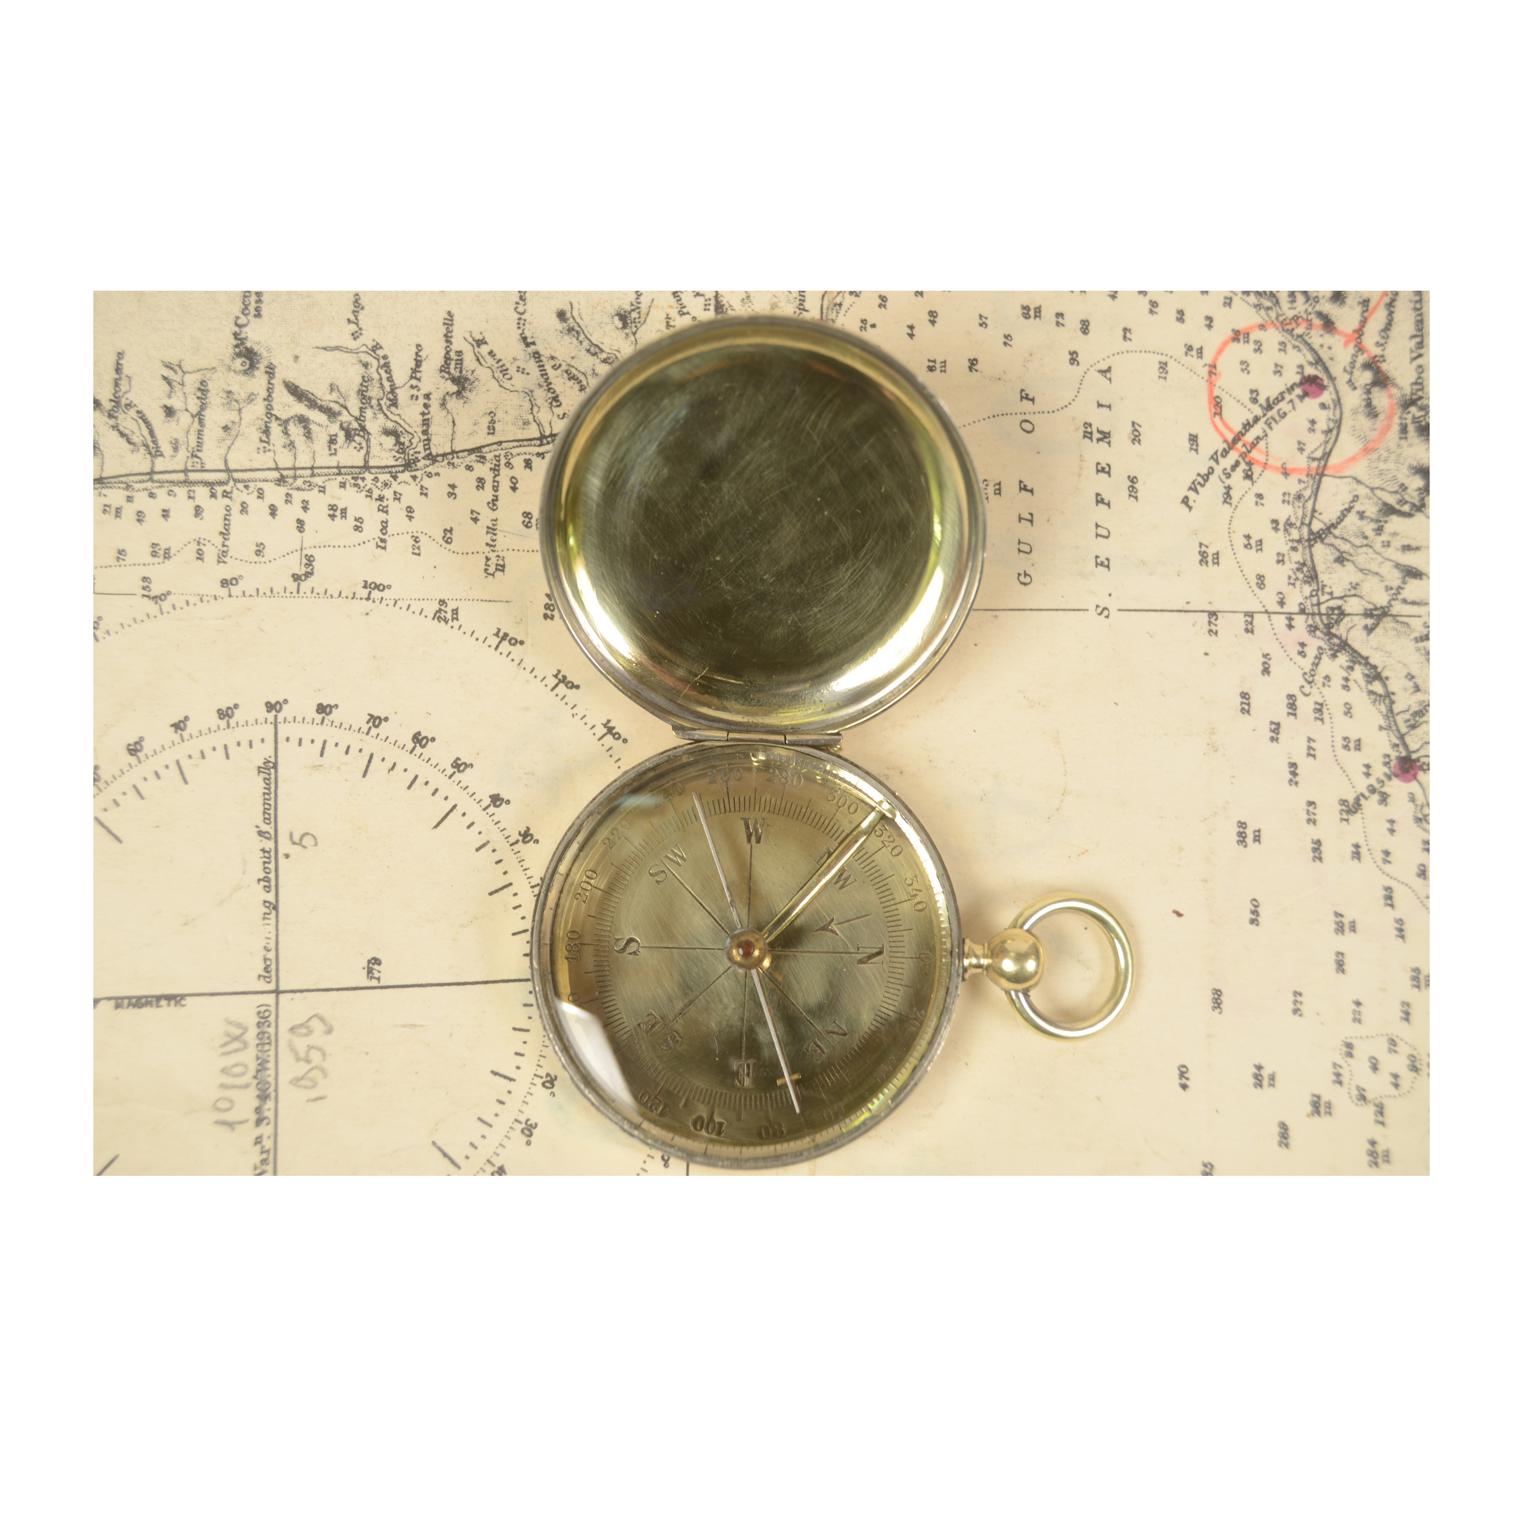 Brass pocket compass in the shape of a pocket watch, complete with lid. Six-winds compass card complete with goniometric circle for calculating the horizontal angles and needle lock. English manufacture of the 1920s. Excellent condition, fully